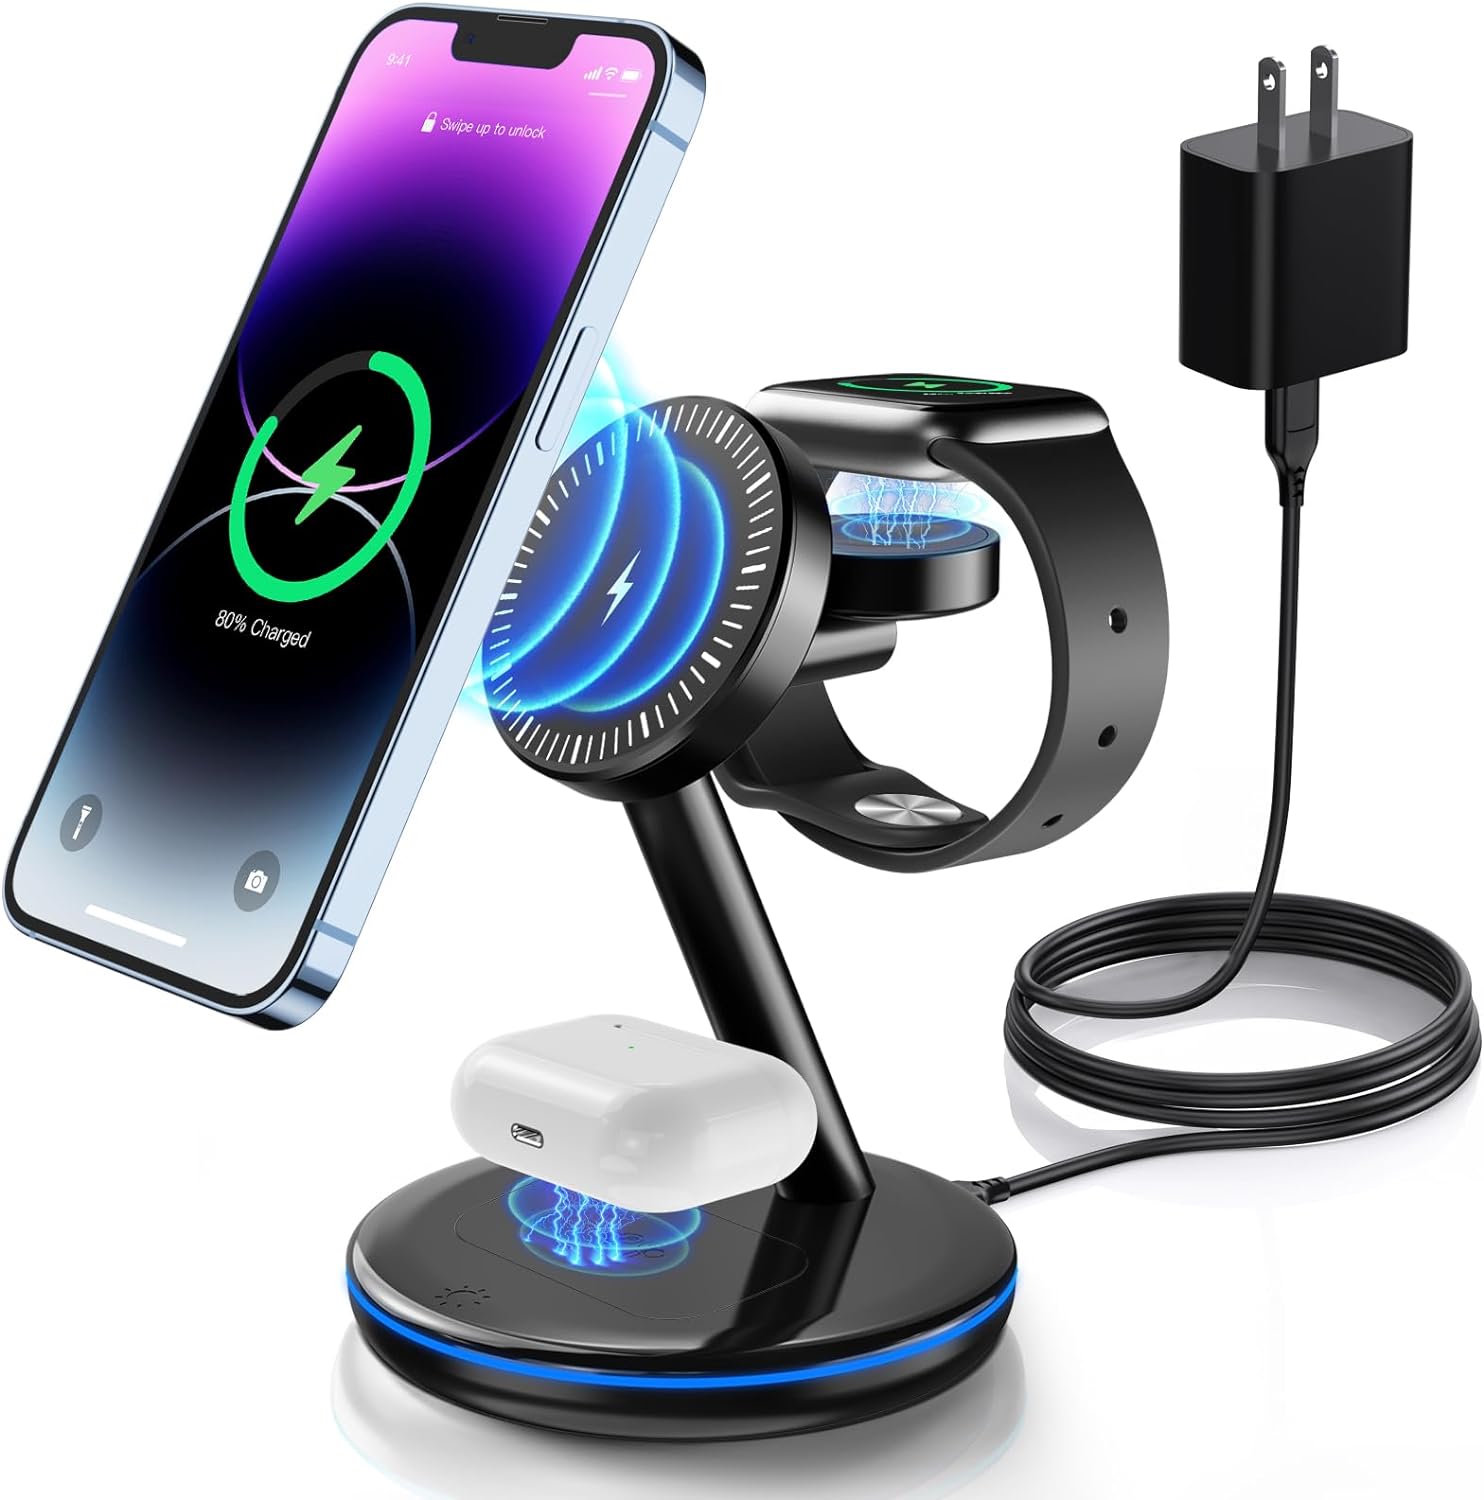 Limited-Time Promo: 3 in 1 Charging Station for Apple Devices | Save 28%!